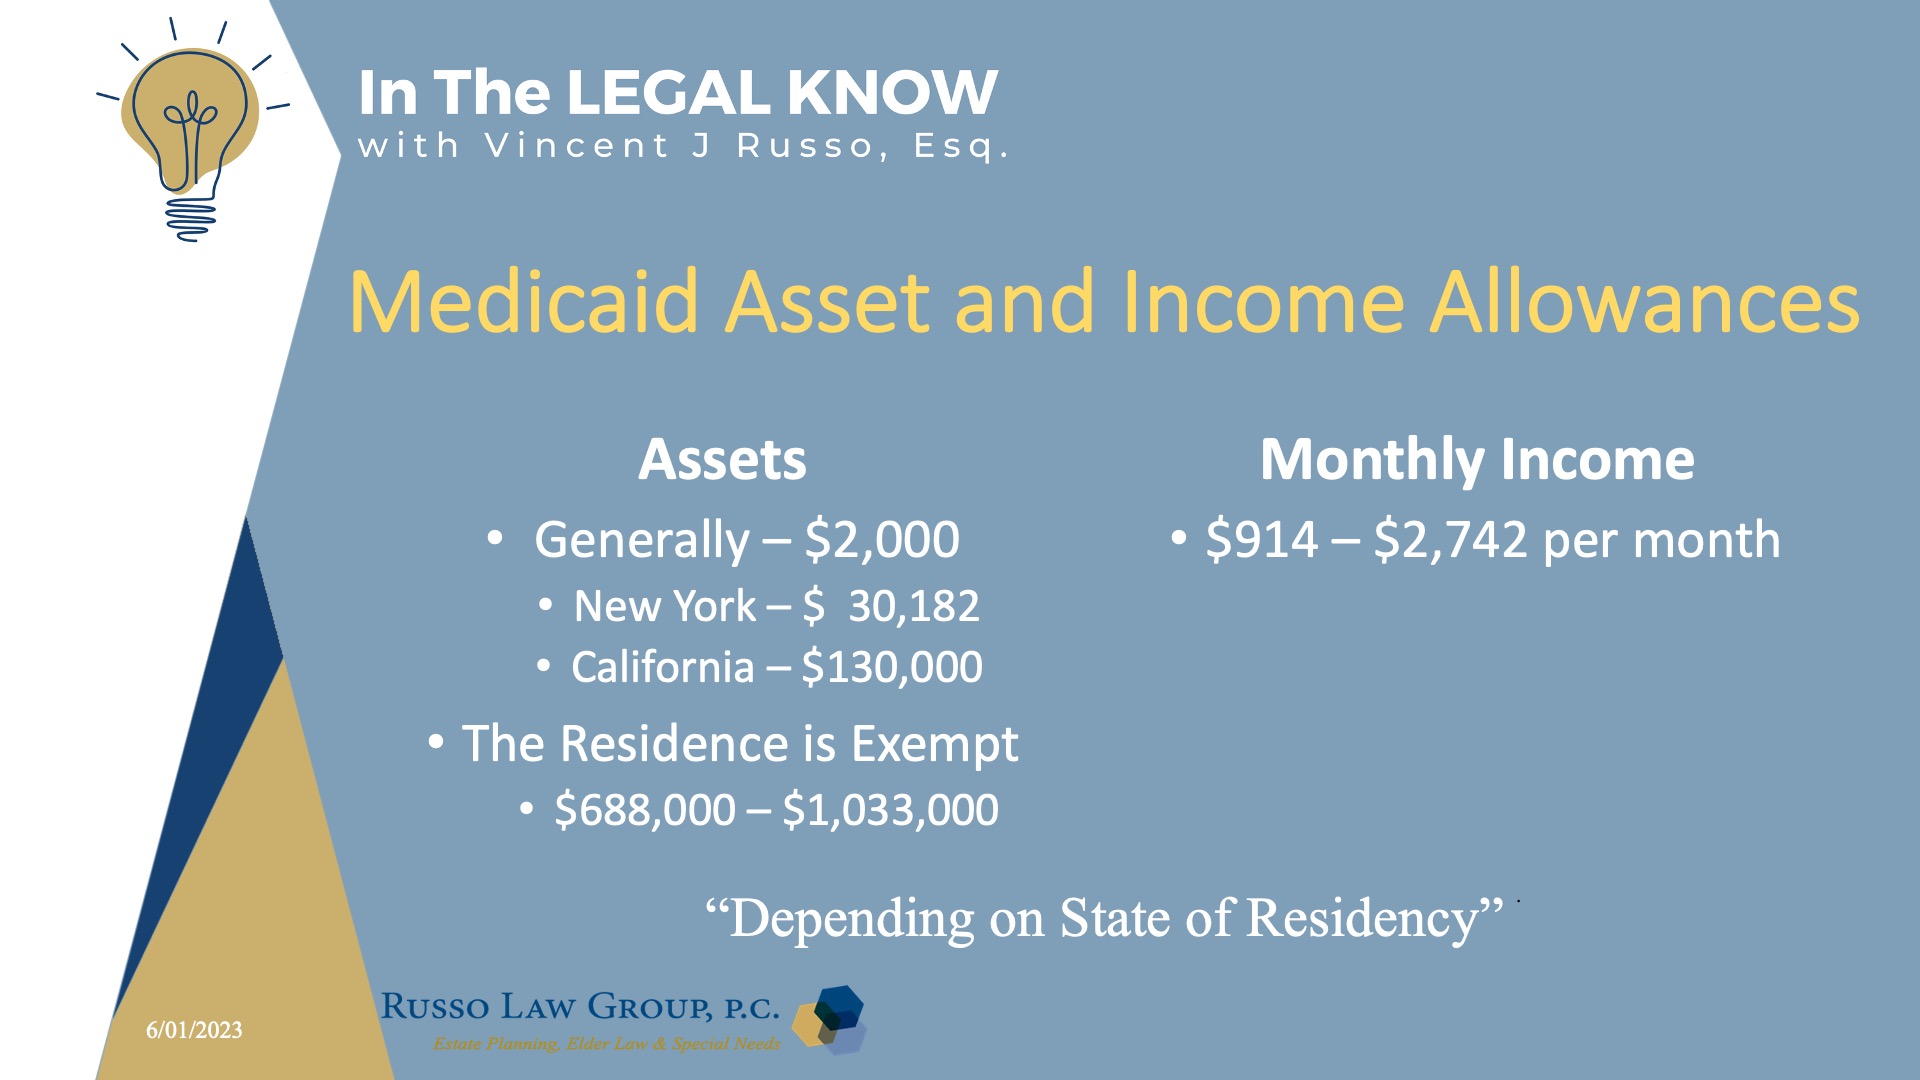 Medicaid Asset and Income Allowances